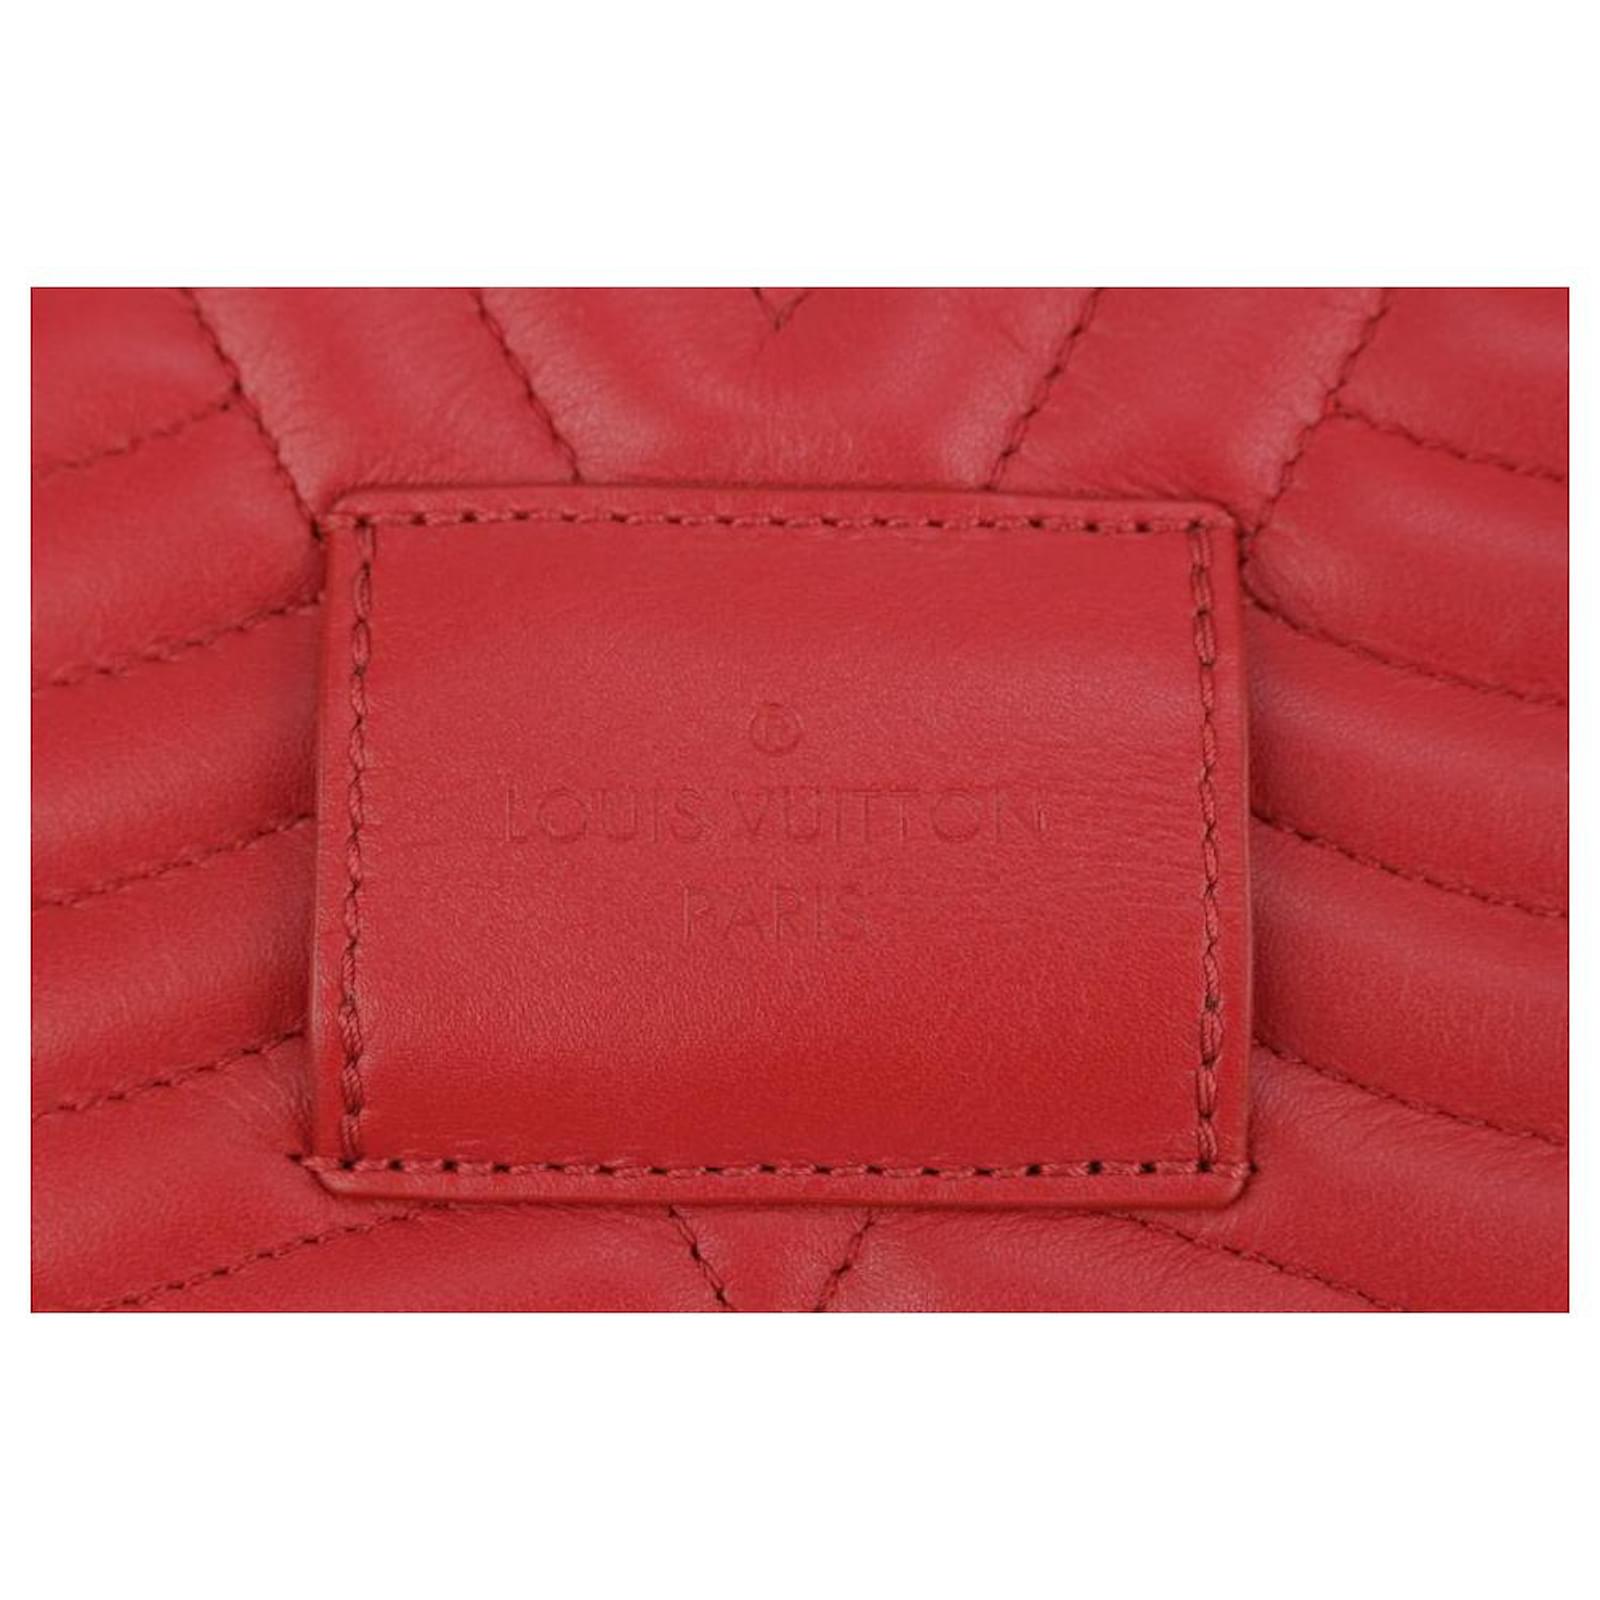 Louis Vuitton Limited Edition Red Quilted Leather New Wave Heart Crossbody  Bag